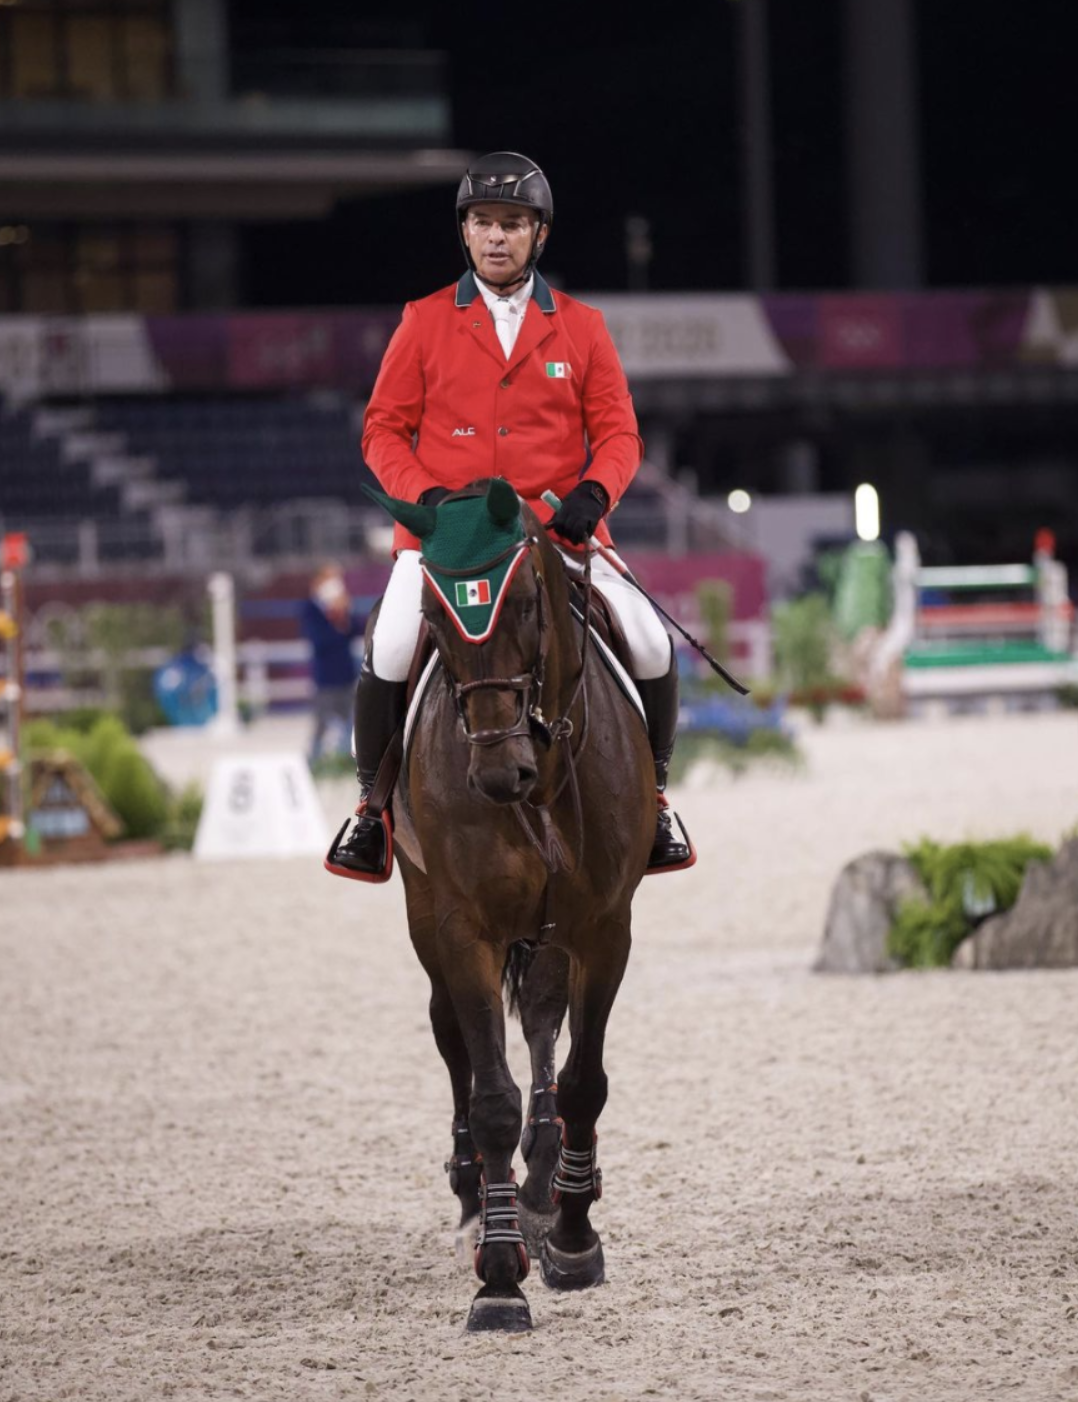 Enrique and Chacna after a clear round at the Tokyo Olympics. Photo: Monica Decima Photography.